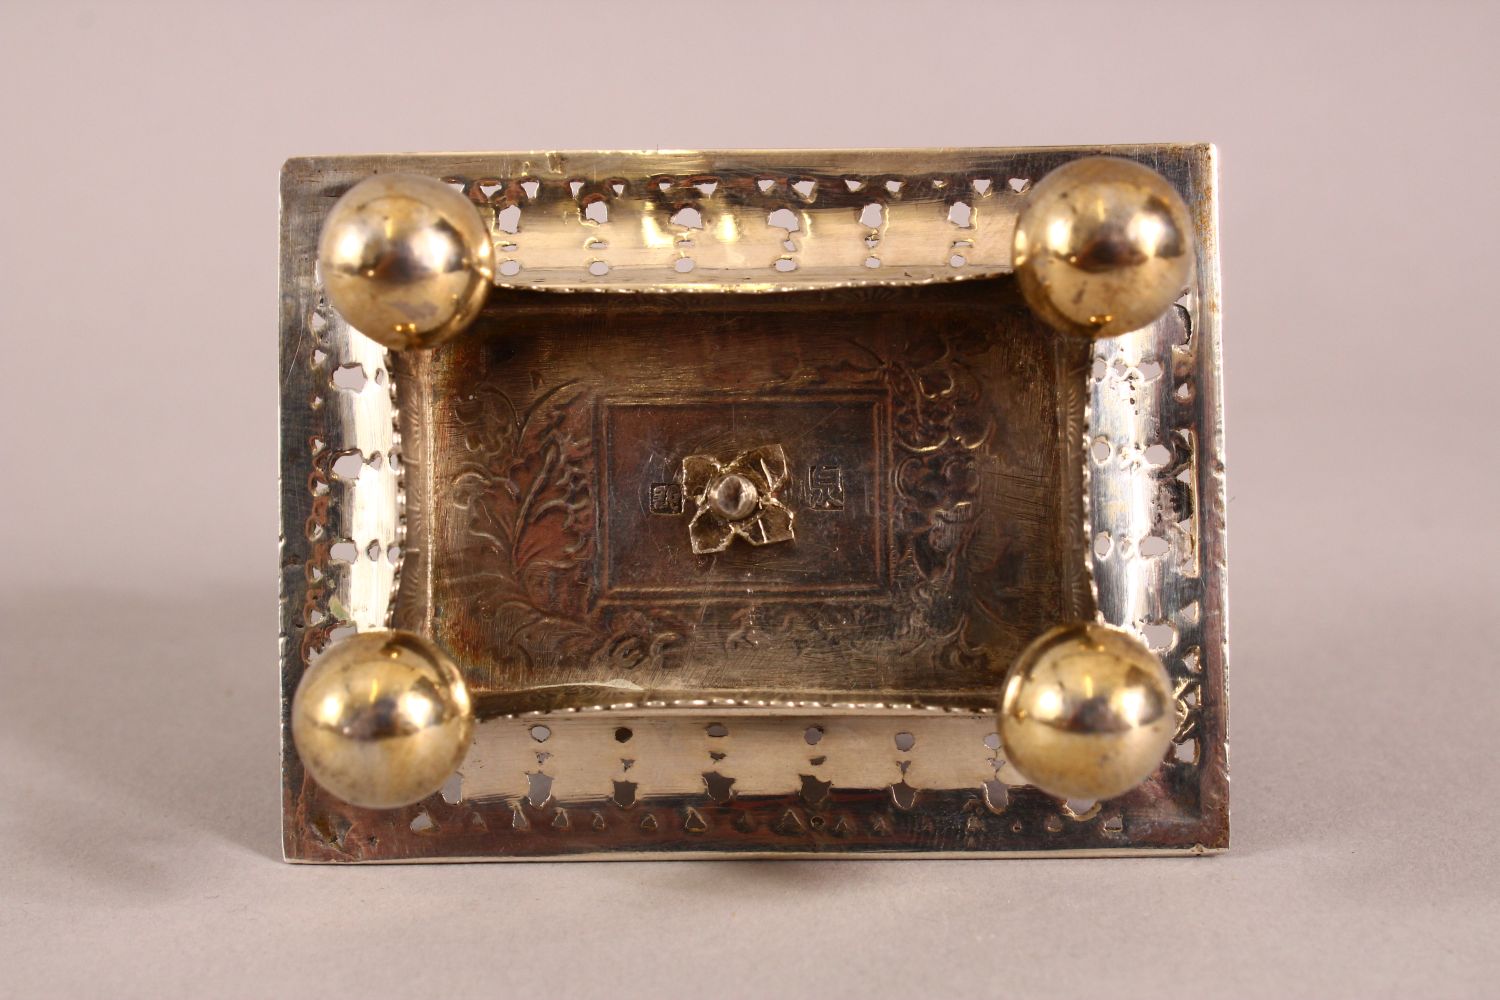 A 19TH CENTURY CHINESE SILVER SNUFF BOTTLE & TRAY - the silver formed snuff bottle housed in a - Image 3 of 4